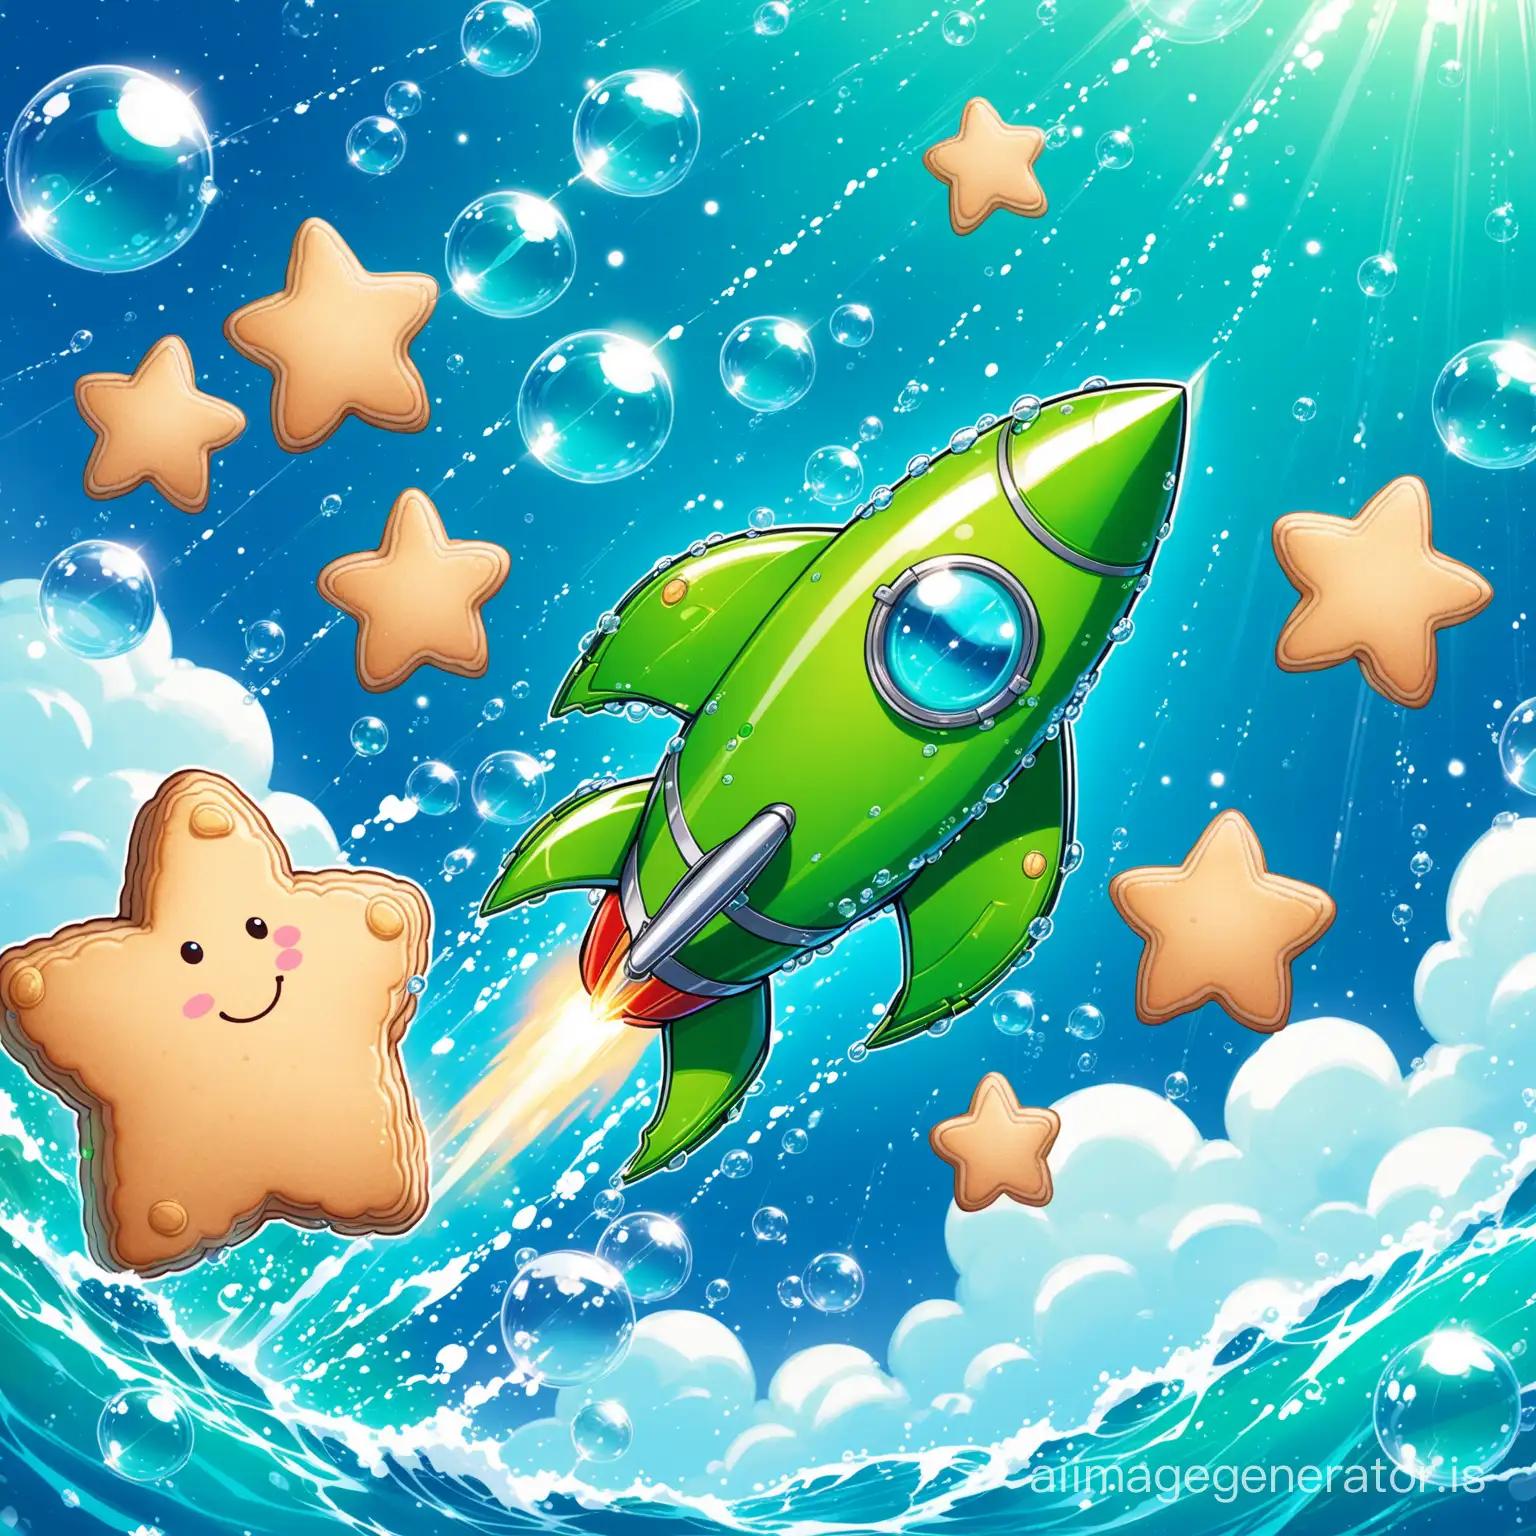 Joyful-Green-Rocket-Soaring-in-the-Upper-Sea-with-Cookie-Rain-and-Blue-Bubbles